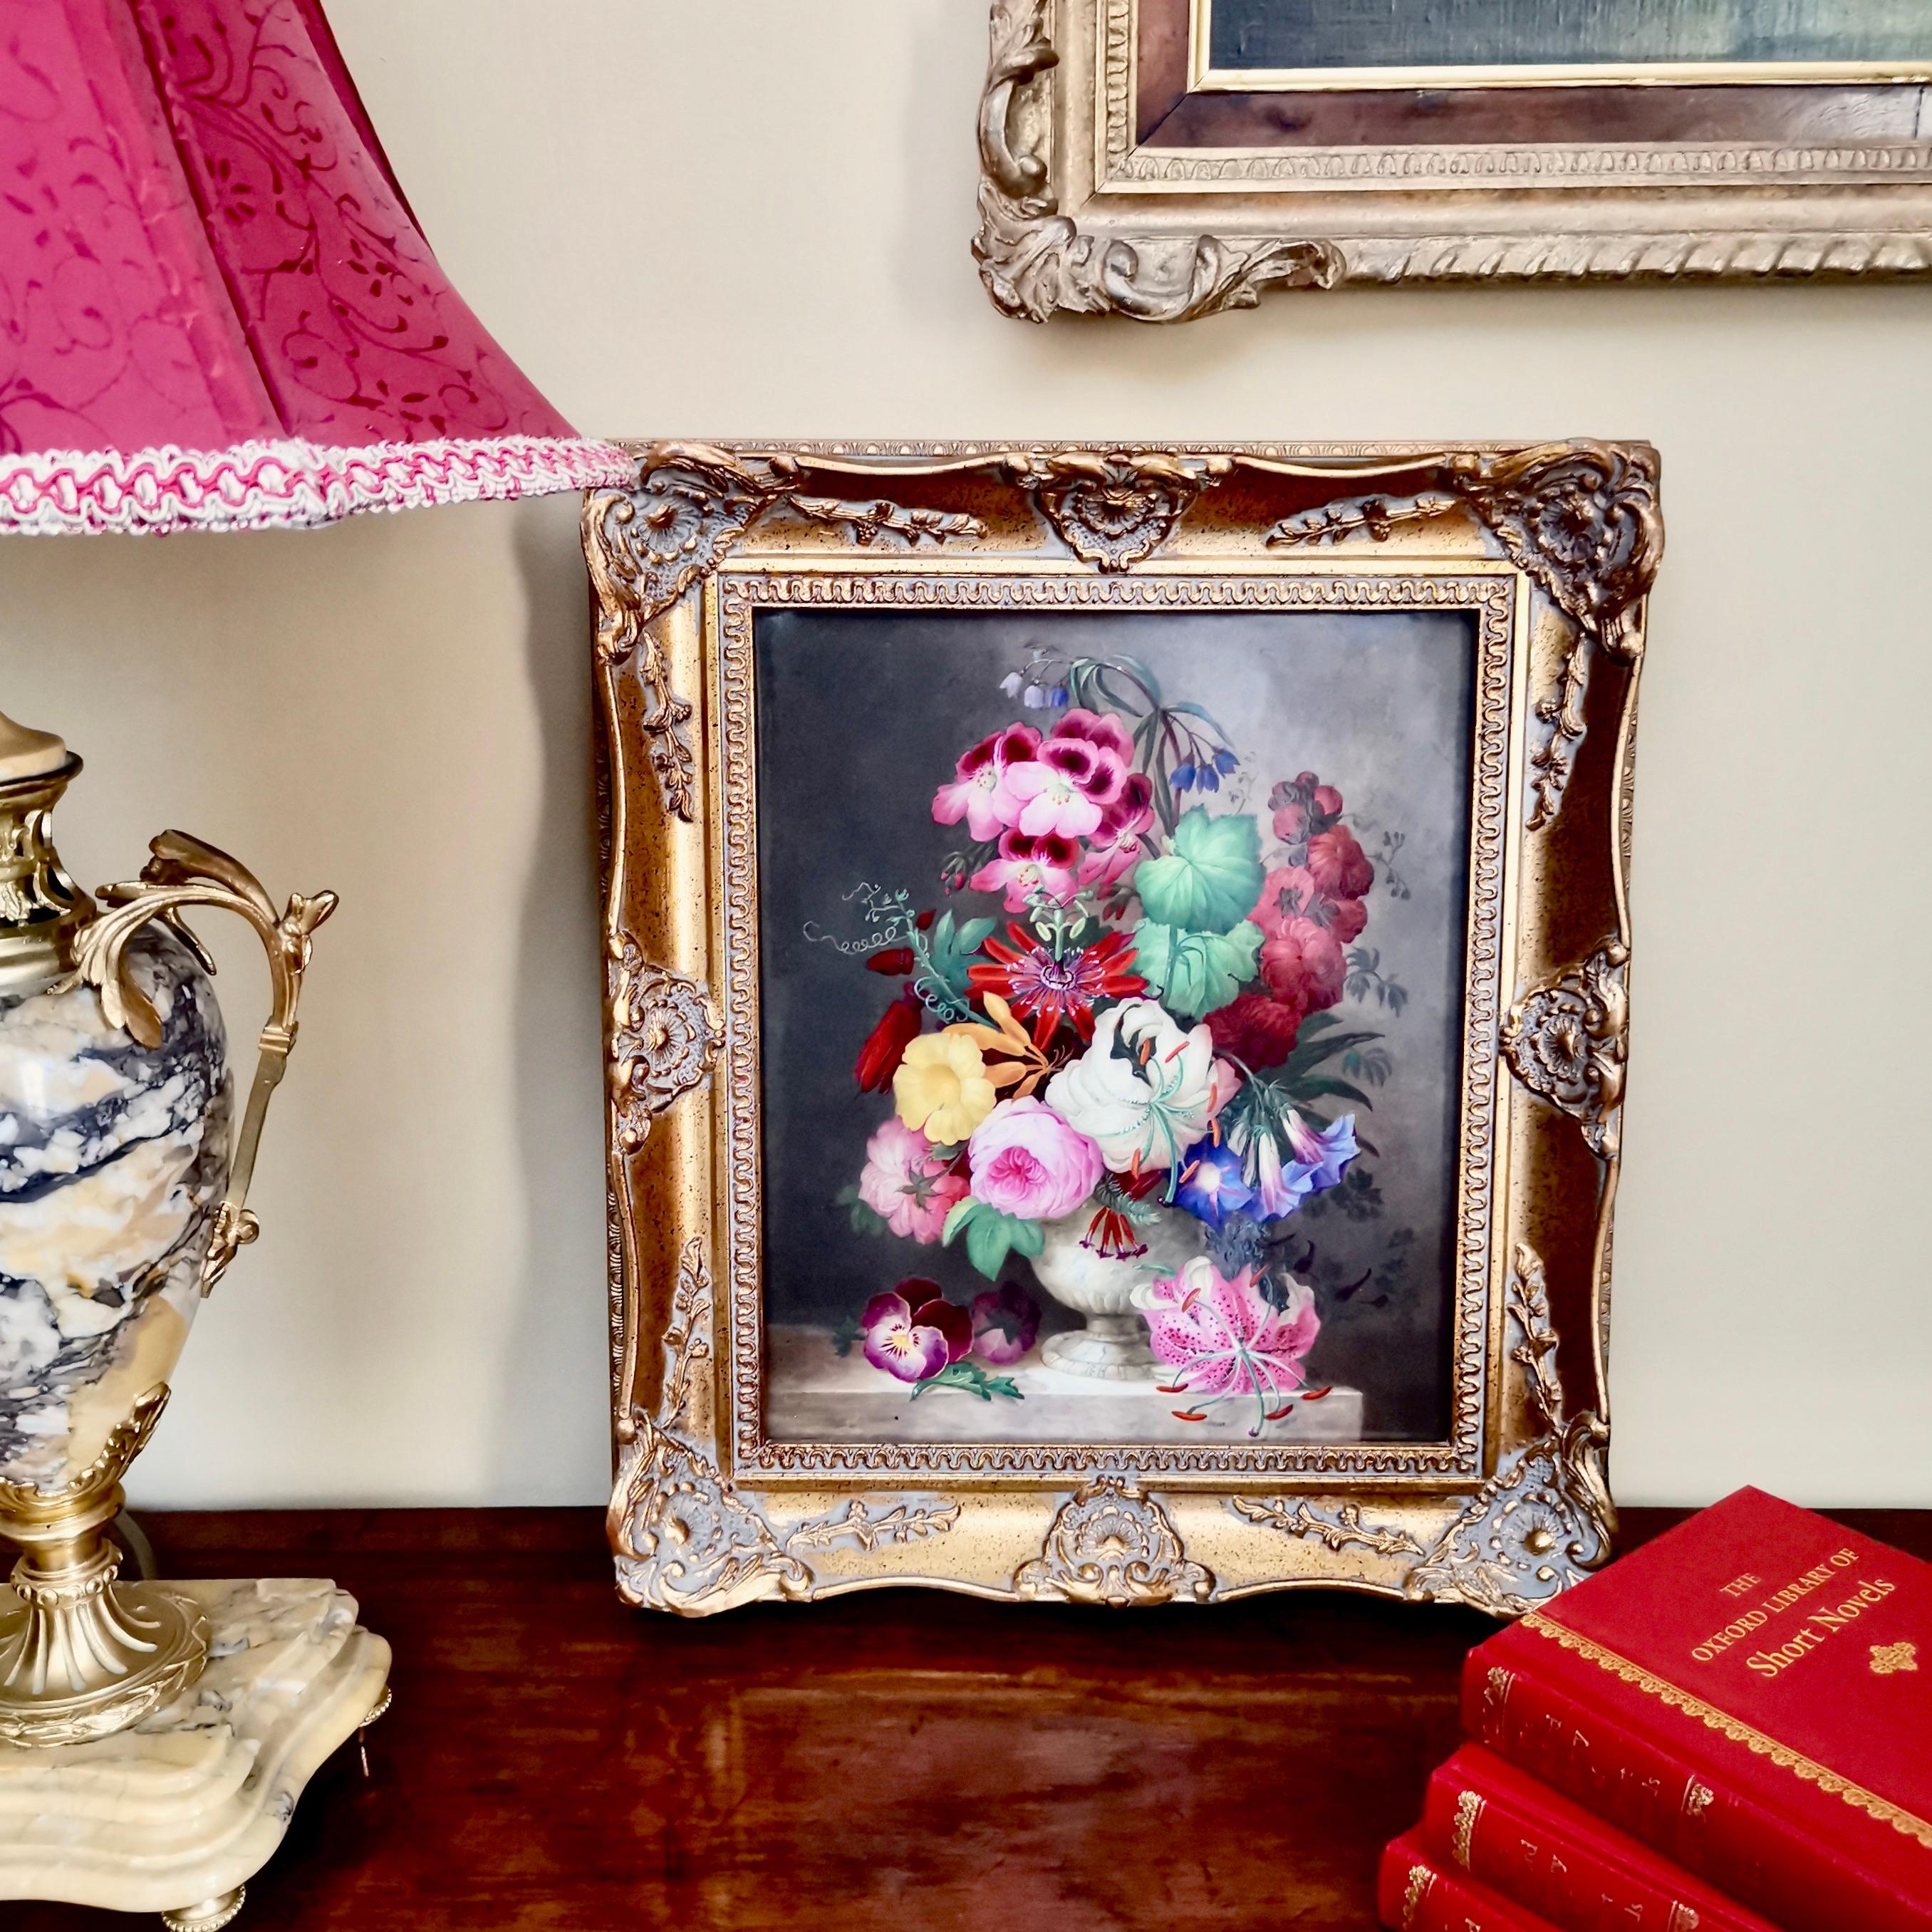 This is a rare and extremely beautiful porcelain plaque in a gilt frame, made by Coalport in circa 1840. The image is of lavish flower bouquet in the Victorian style.

Coalport was one of the leading potters in 19th and 20th century Staffordshire.